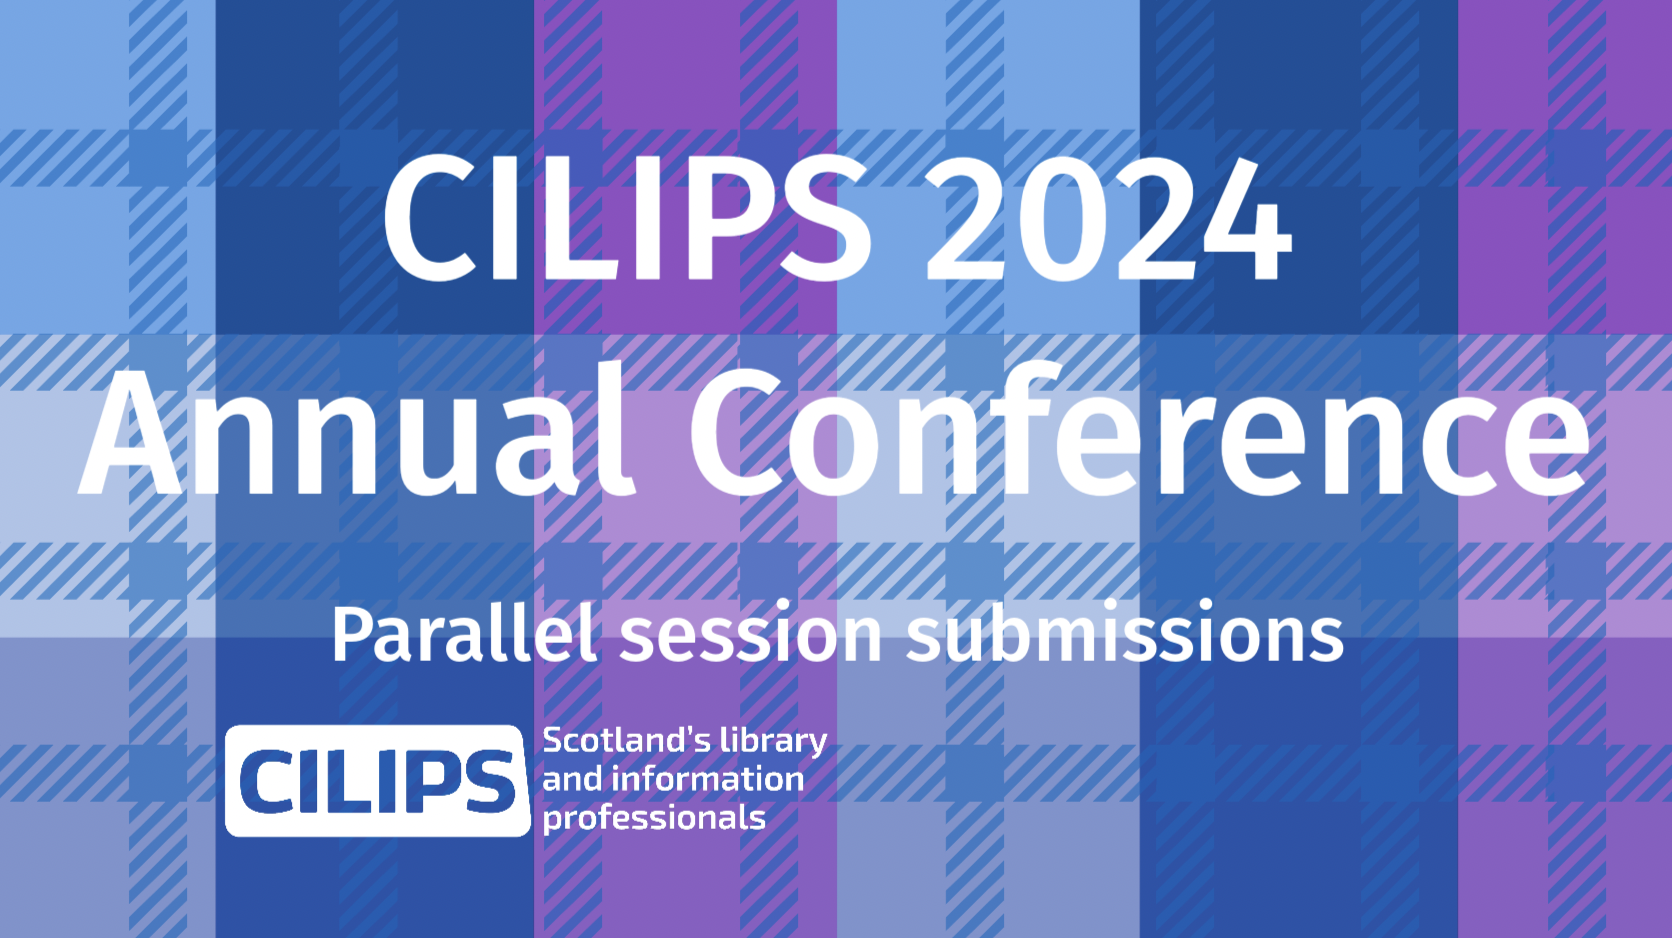 CILIPS 2024, Annual Conference, parallel session submissions, cilips logo on a tartan background.